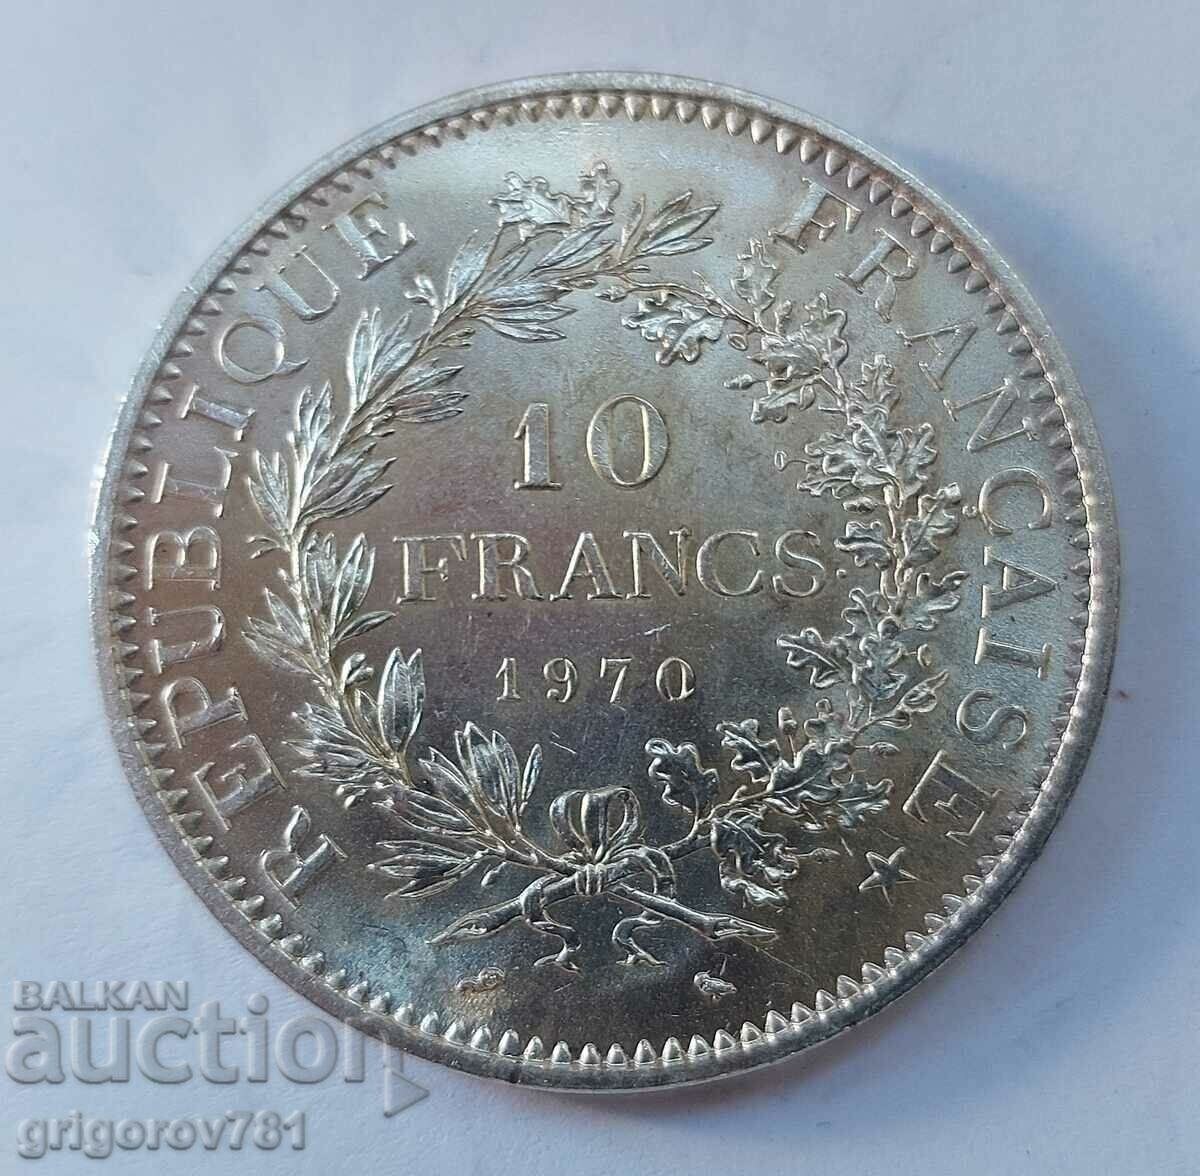 10 Francs Silver France 1970 - Silver Coin #28